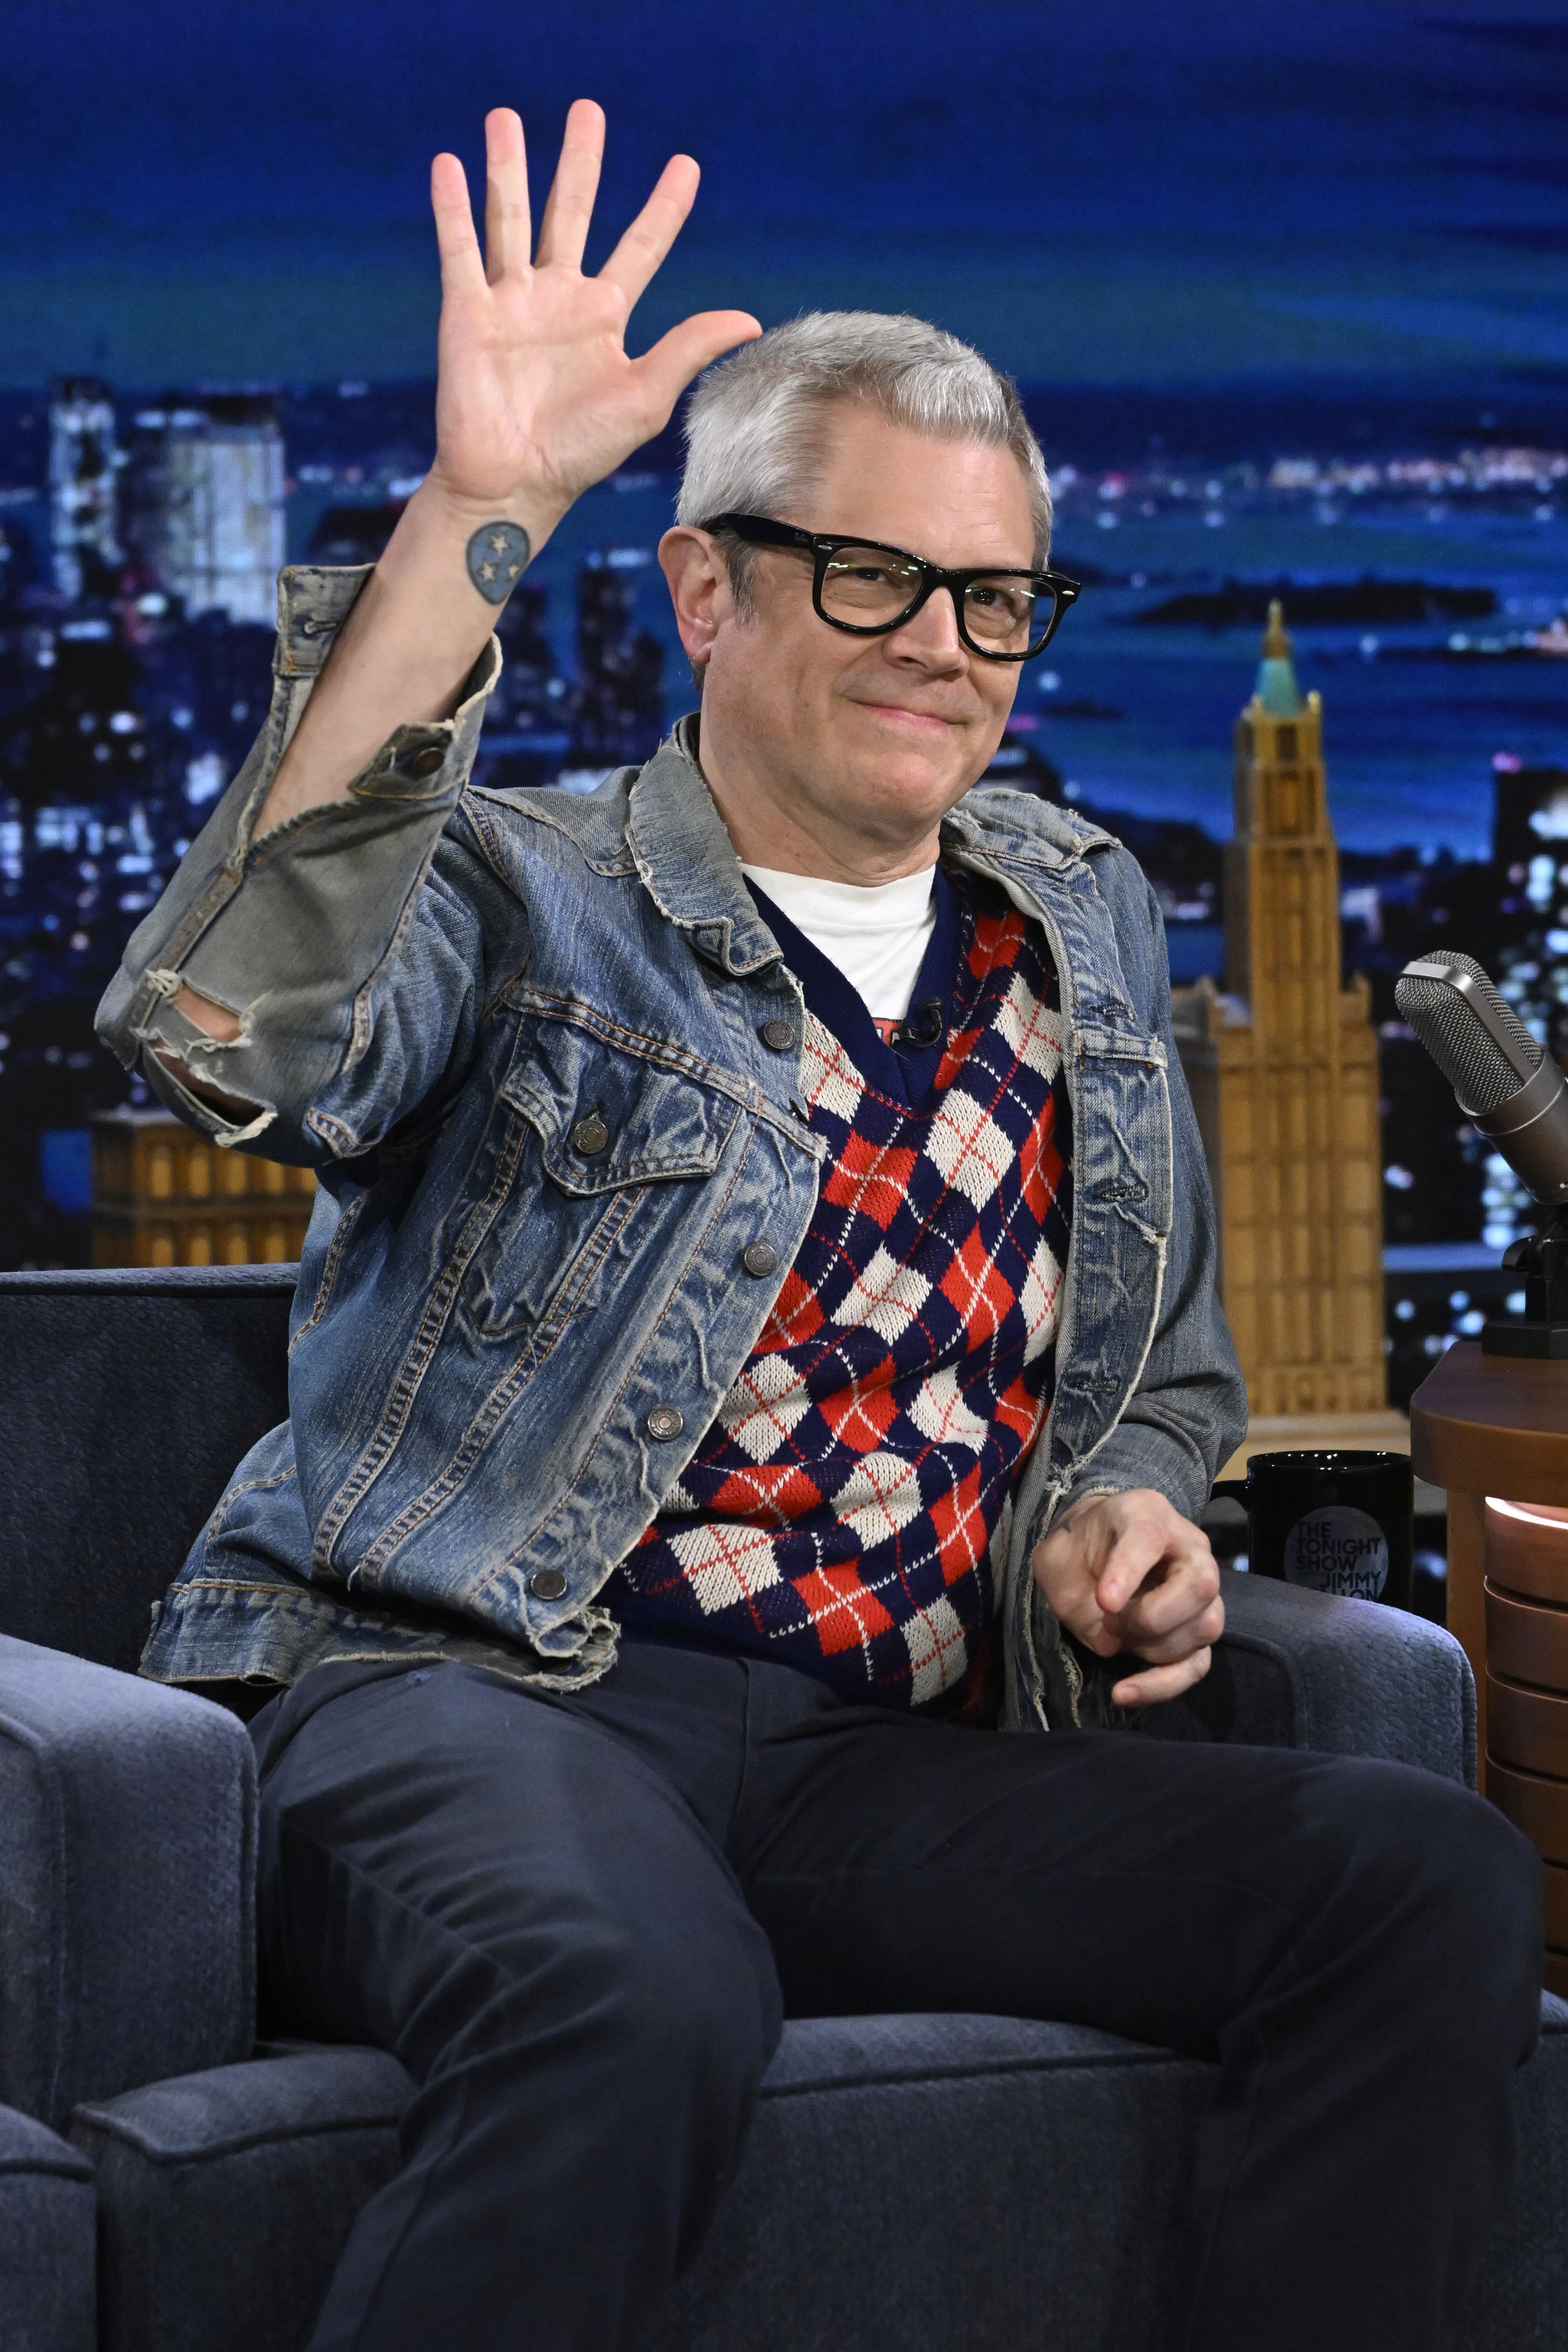 Johnny Knoxville, dressed in a denim jacket, patterned sweater, and glasses, waves while seated on a talk show set